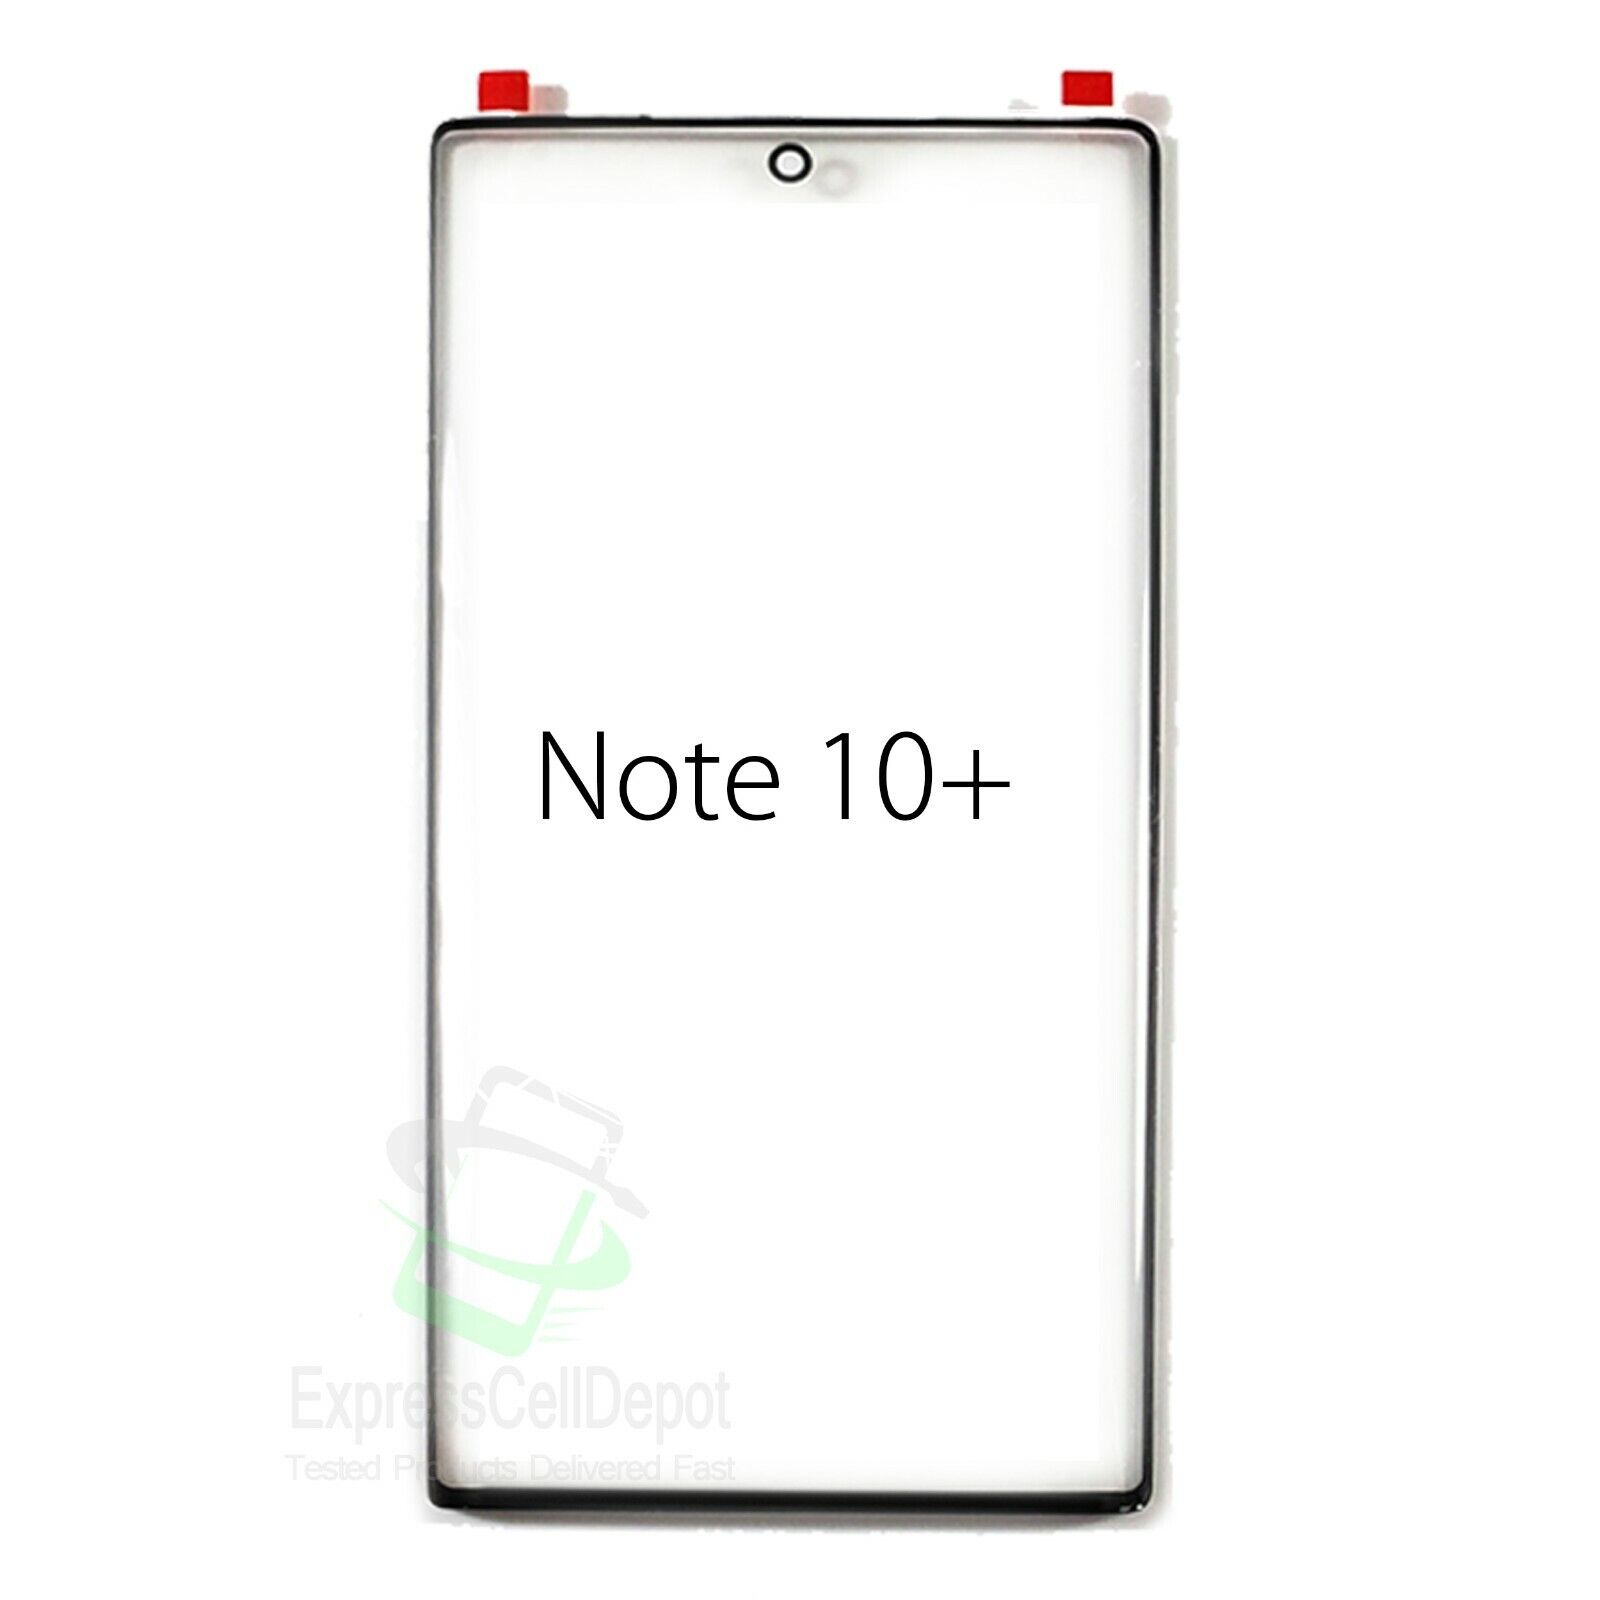 Samsung Galaxy Note 20/Ultra/10+/10/9/8 Replacement Screen Front Outer Glass Unbranded/Generic Does Not Apply - фотография #12